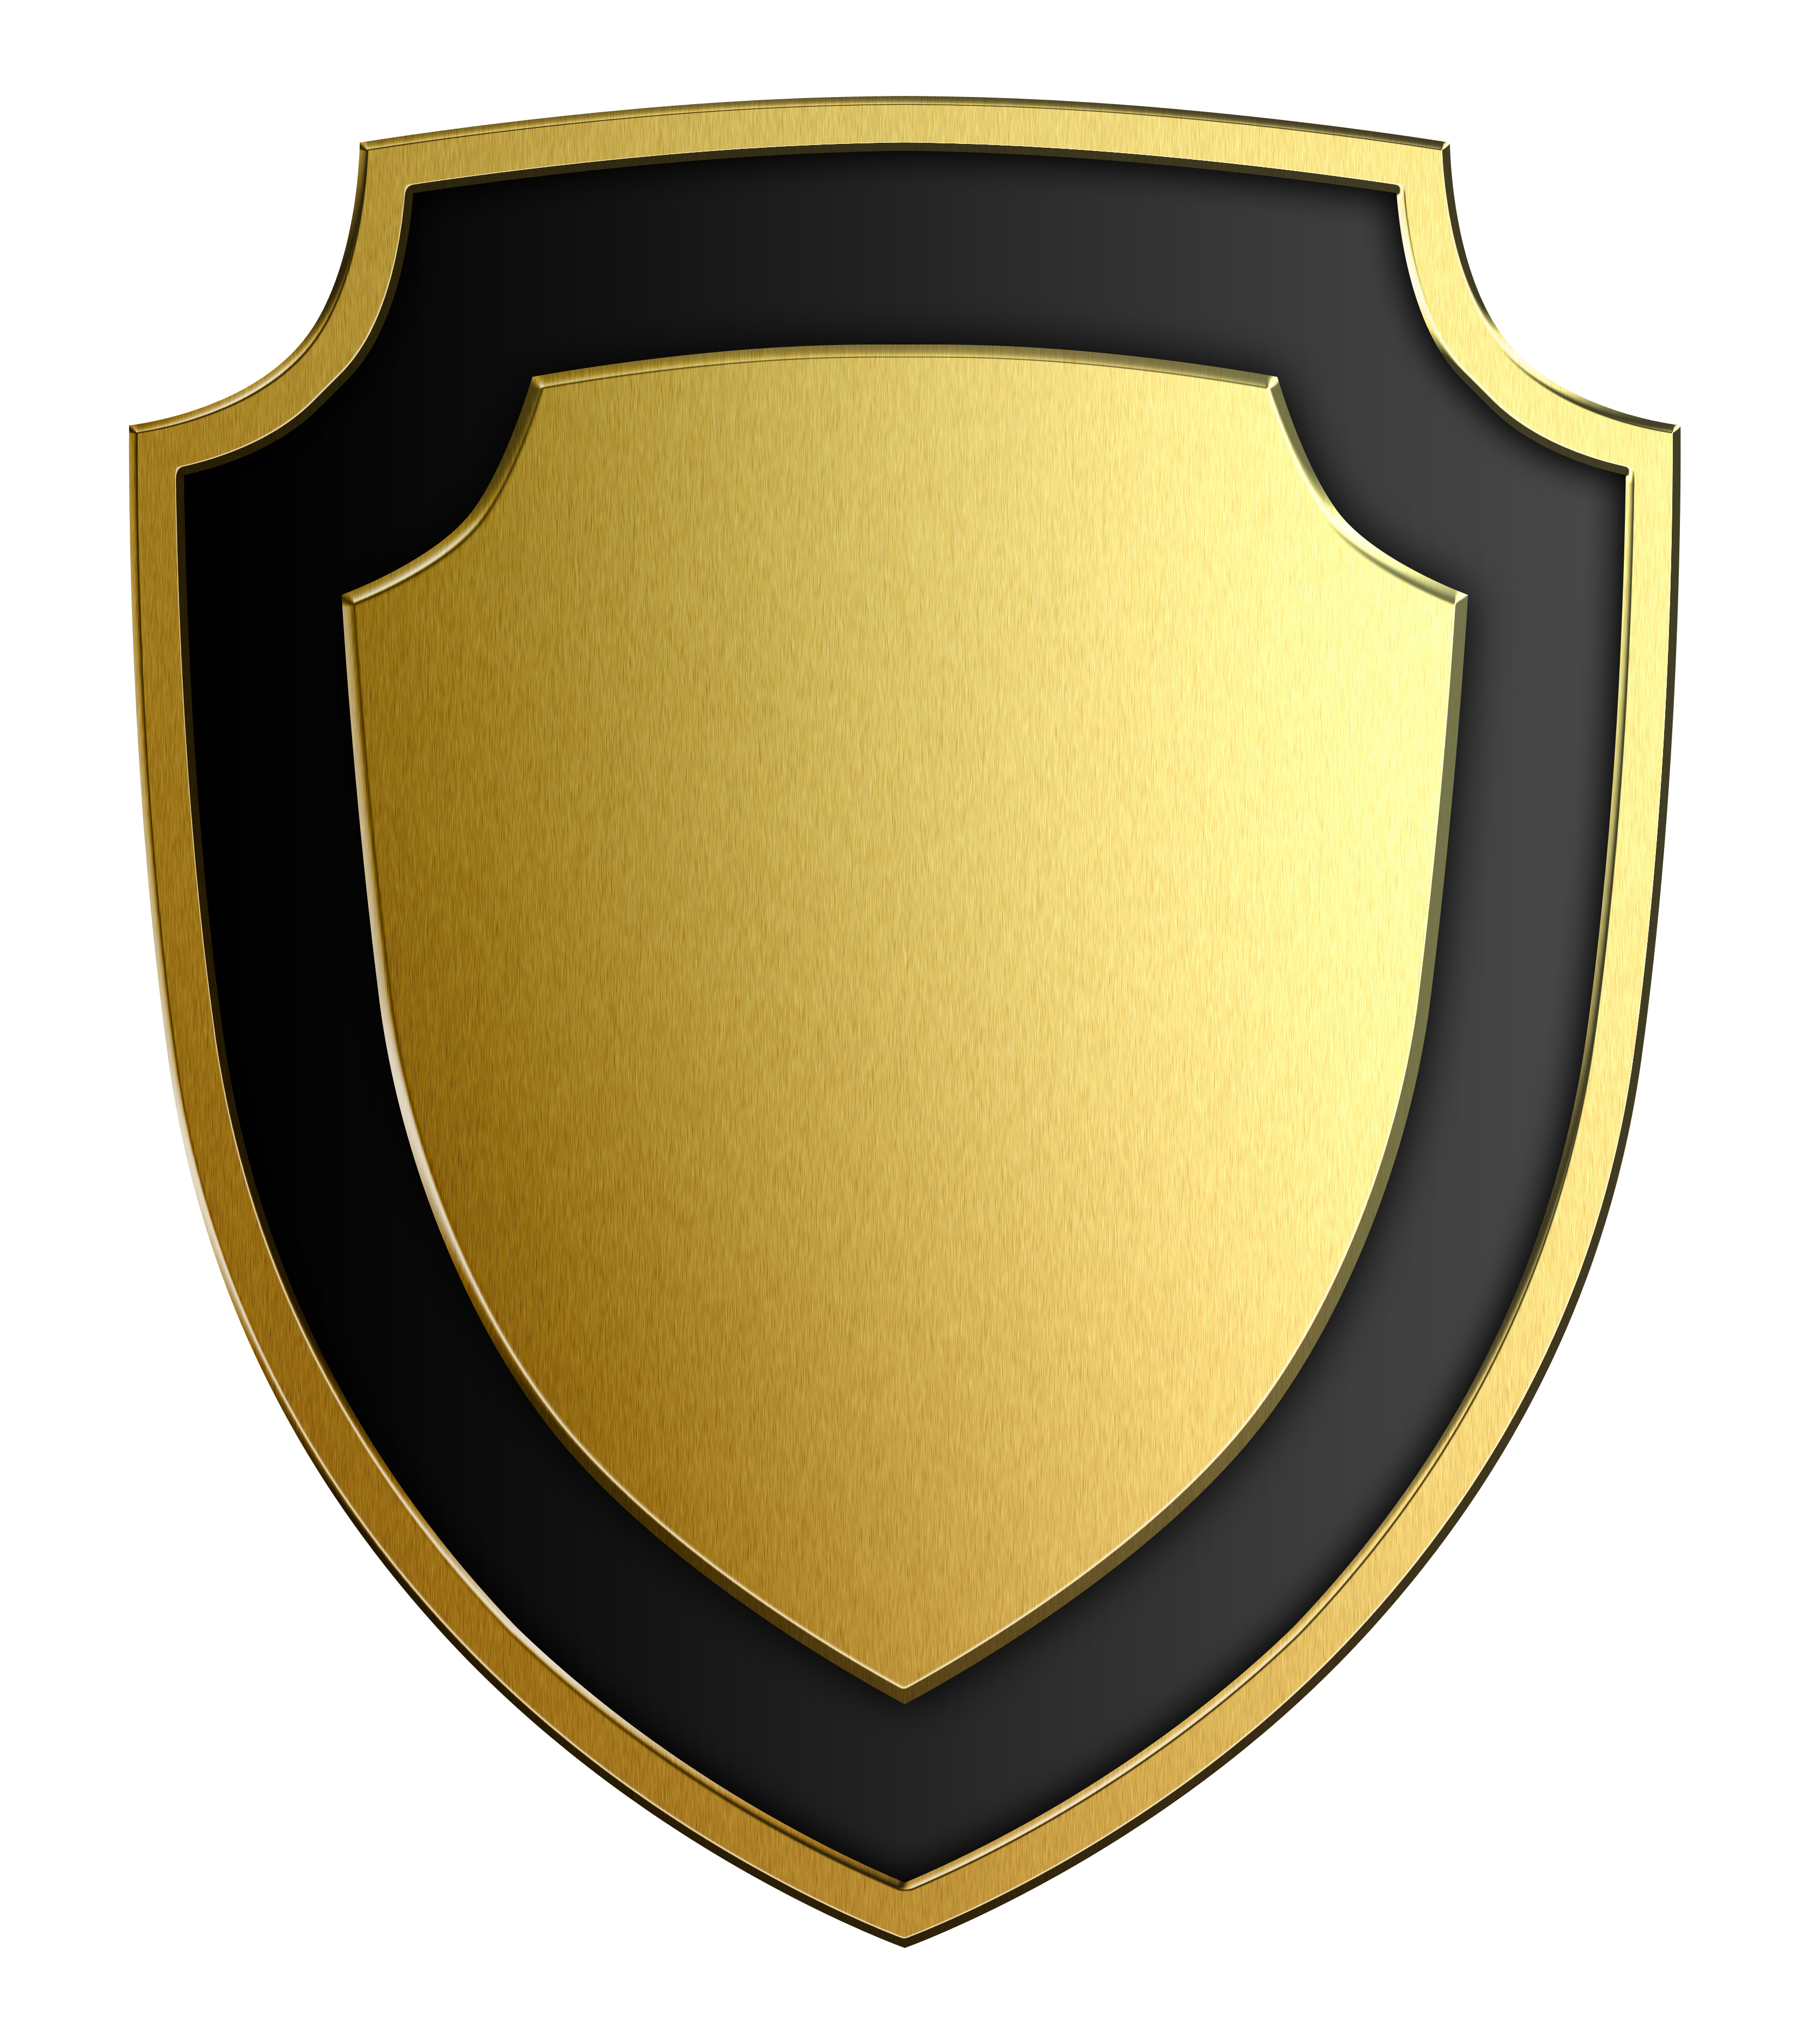 Image Of Shield Sword And Shield Clipart